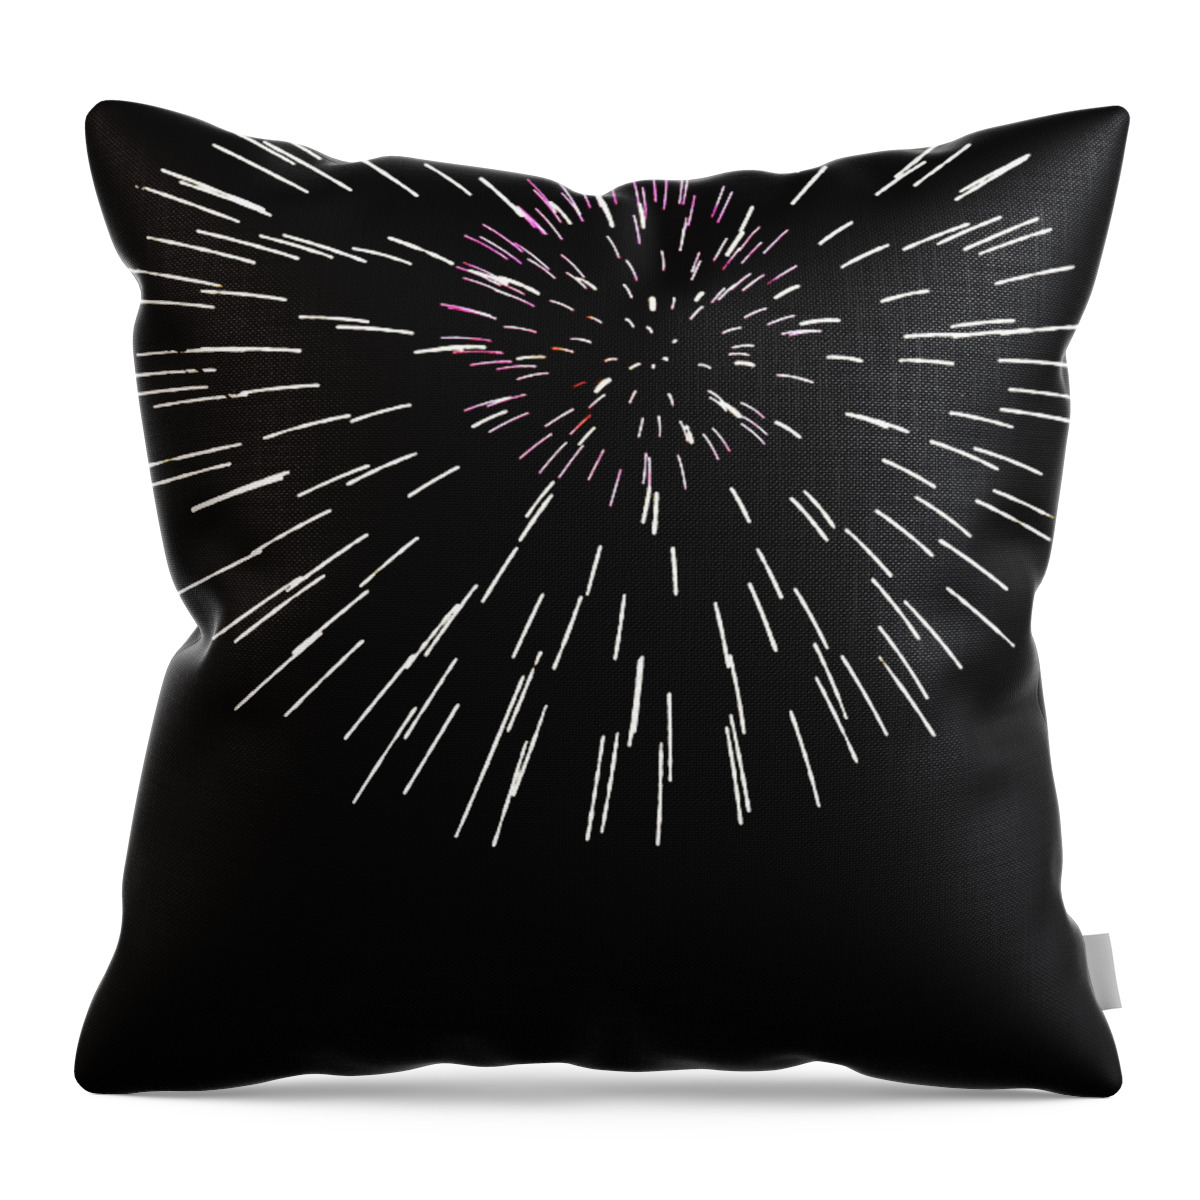 July 4th Throw Pillow featuring the photograph Snowflake by Phill Doherty